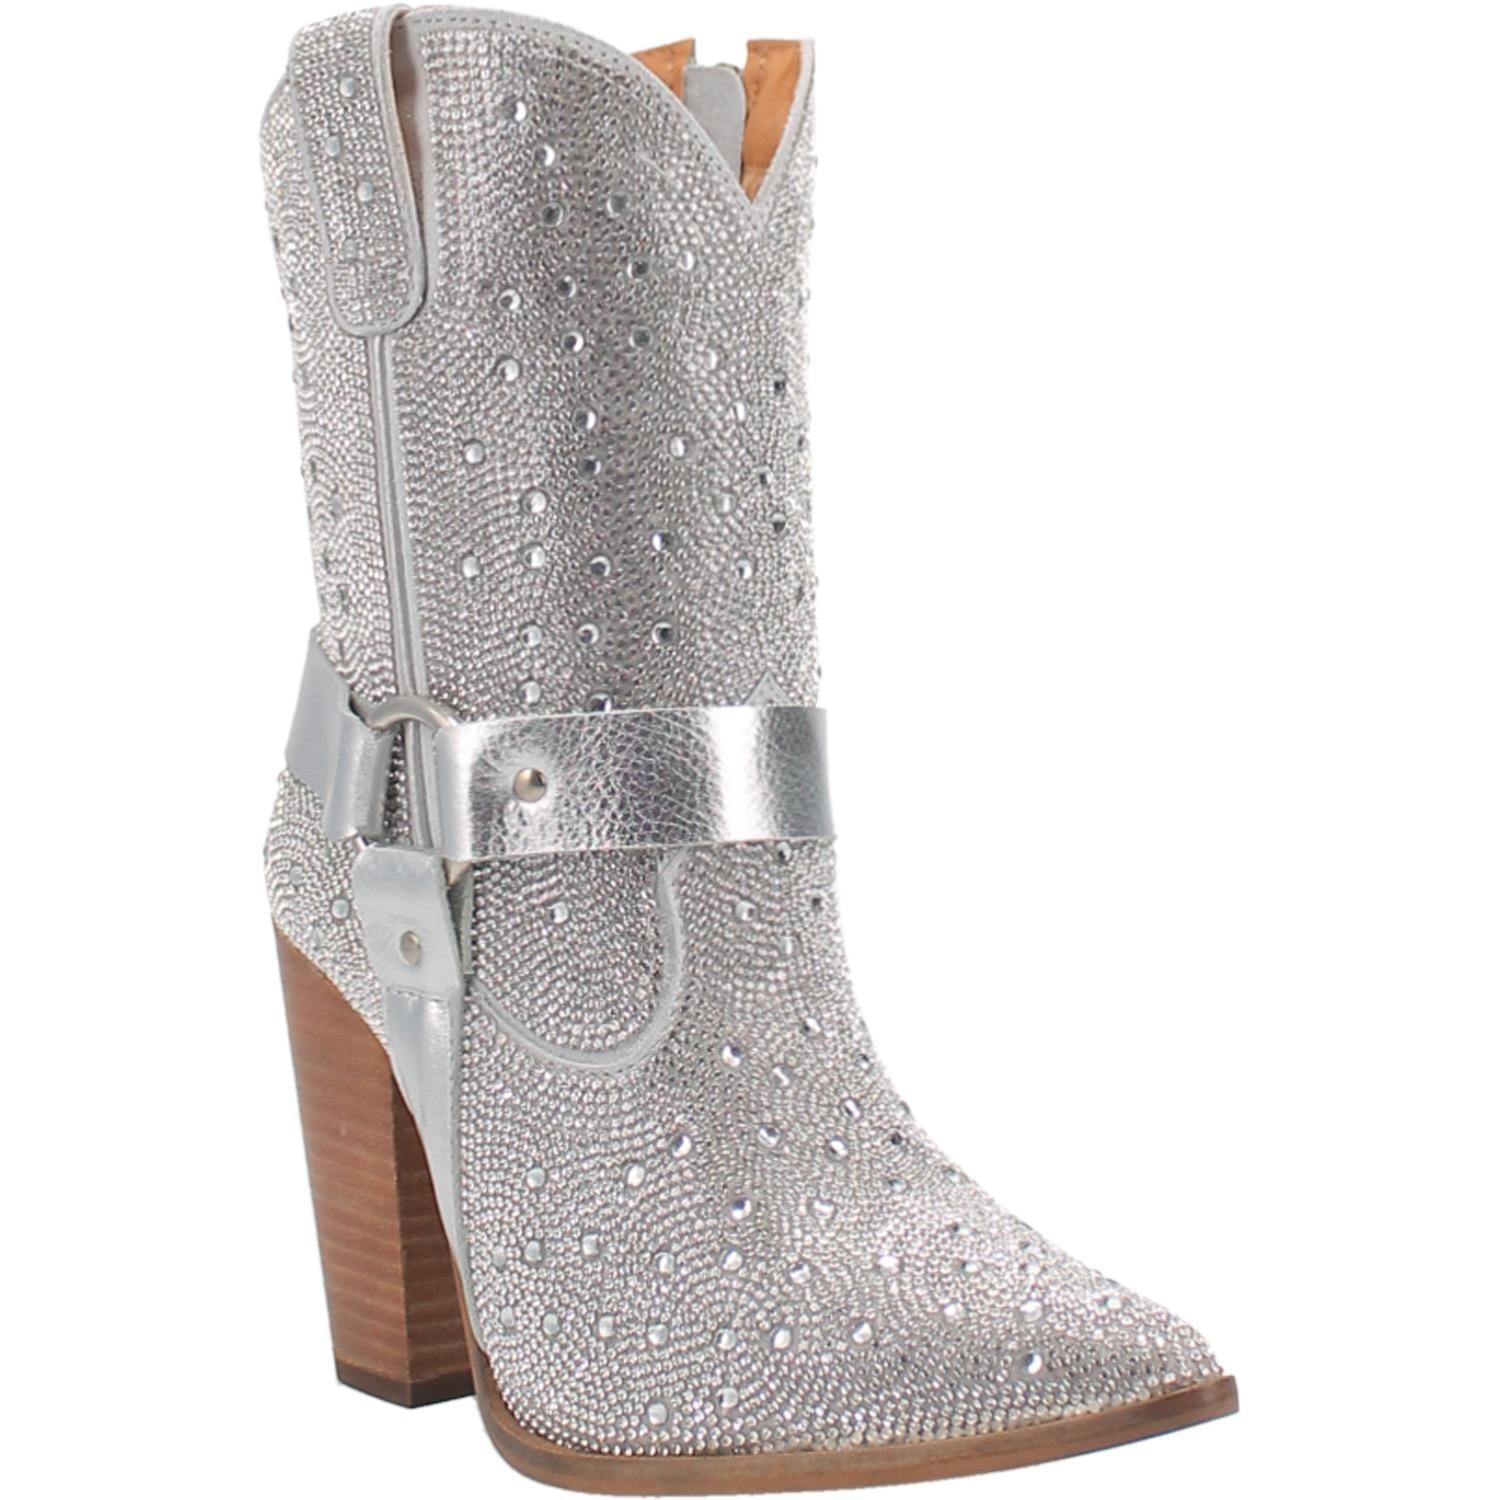 A small silver bootie with rhinestones top to bottom, tall heel, V cut at the top, matching straps, and leather straps going through the middle and under the boot. Item is pictured on a plain white background